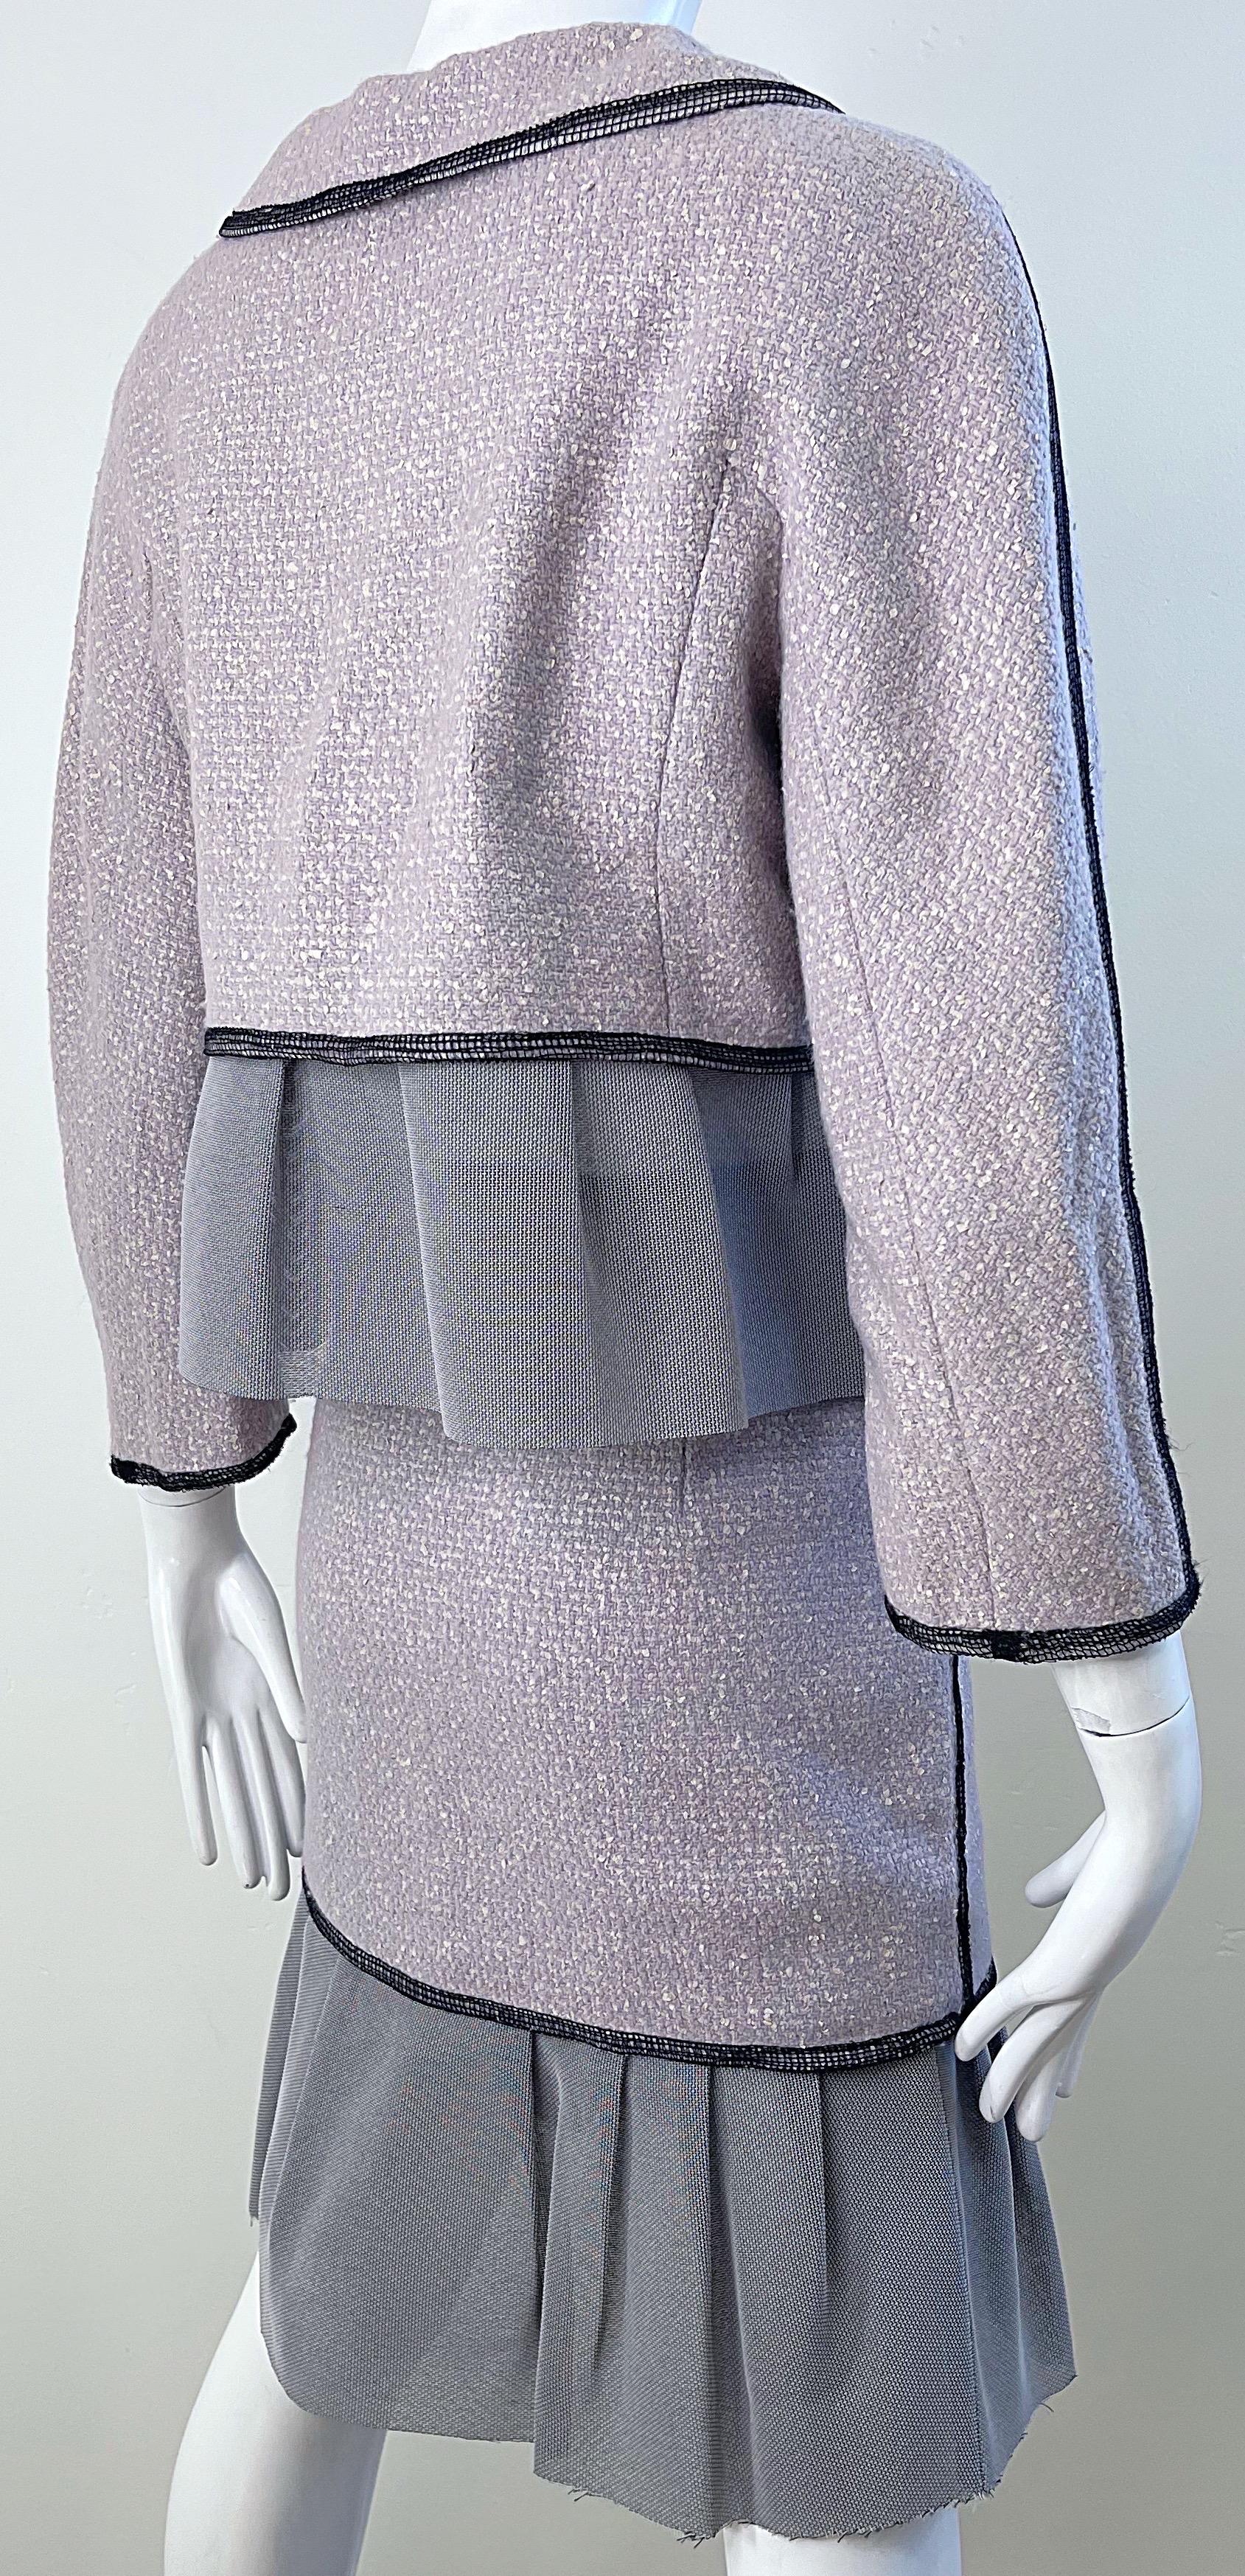 Rochas Couture Runway Fall 2004 Light Purple Black Size 40 - 6 / 8 Skirt Suit For Sale 3